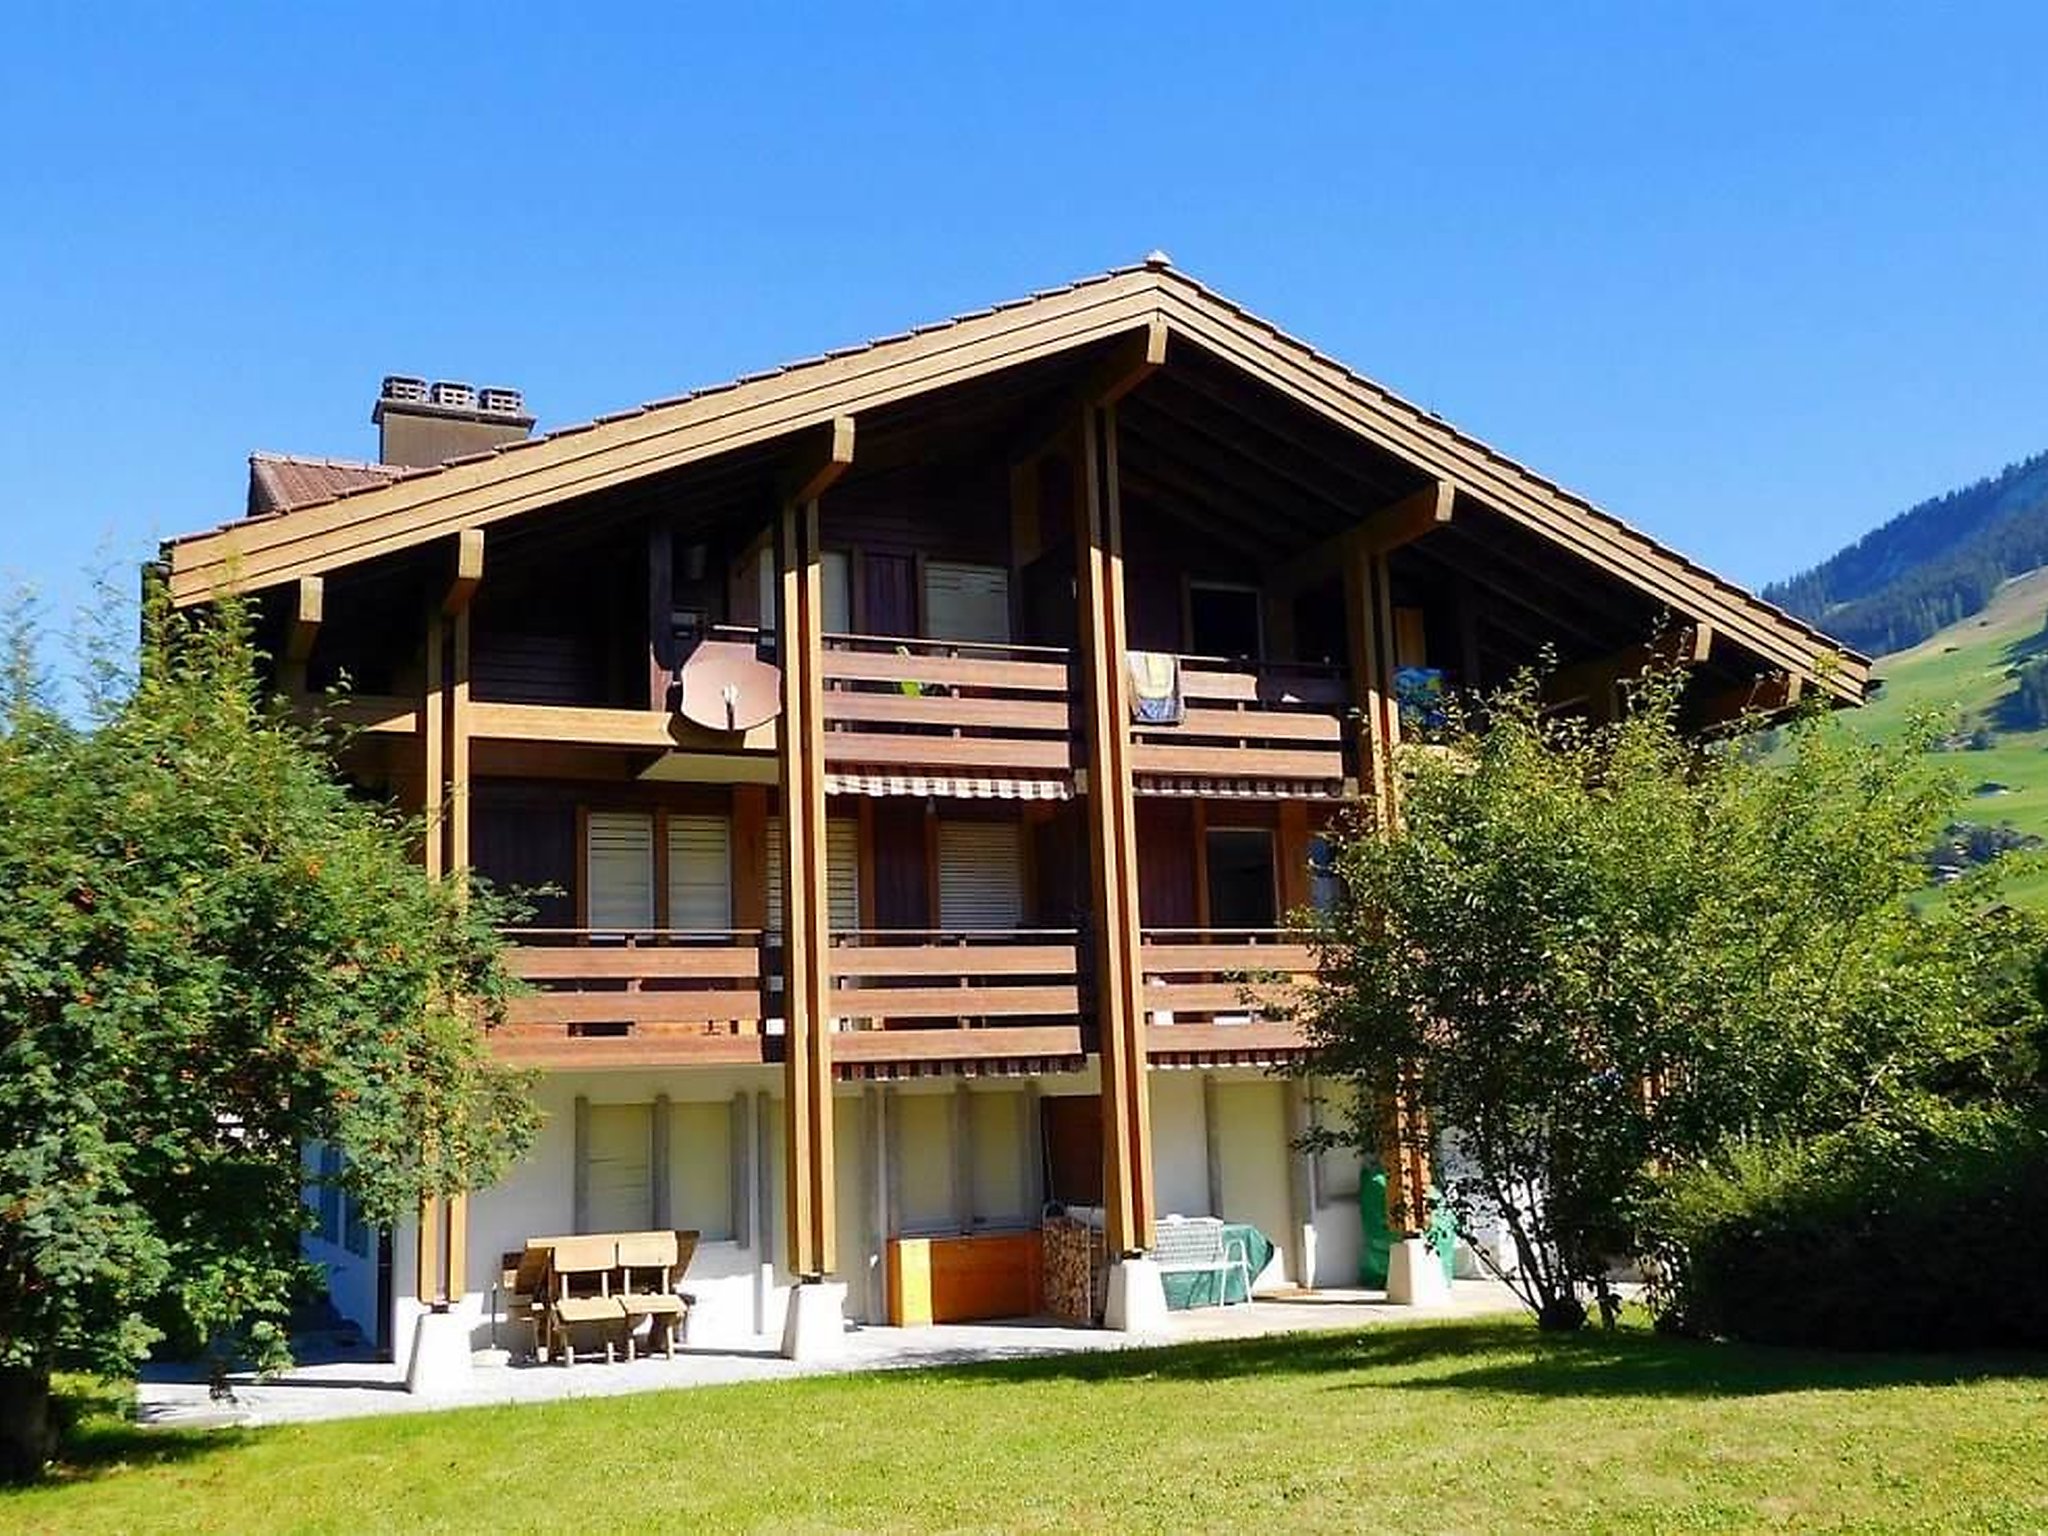 Amaryllis  with 1 bedrooms and 1.5 bathrooms - Lenk